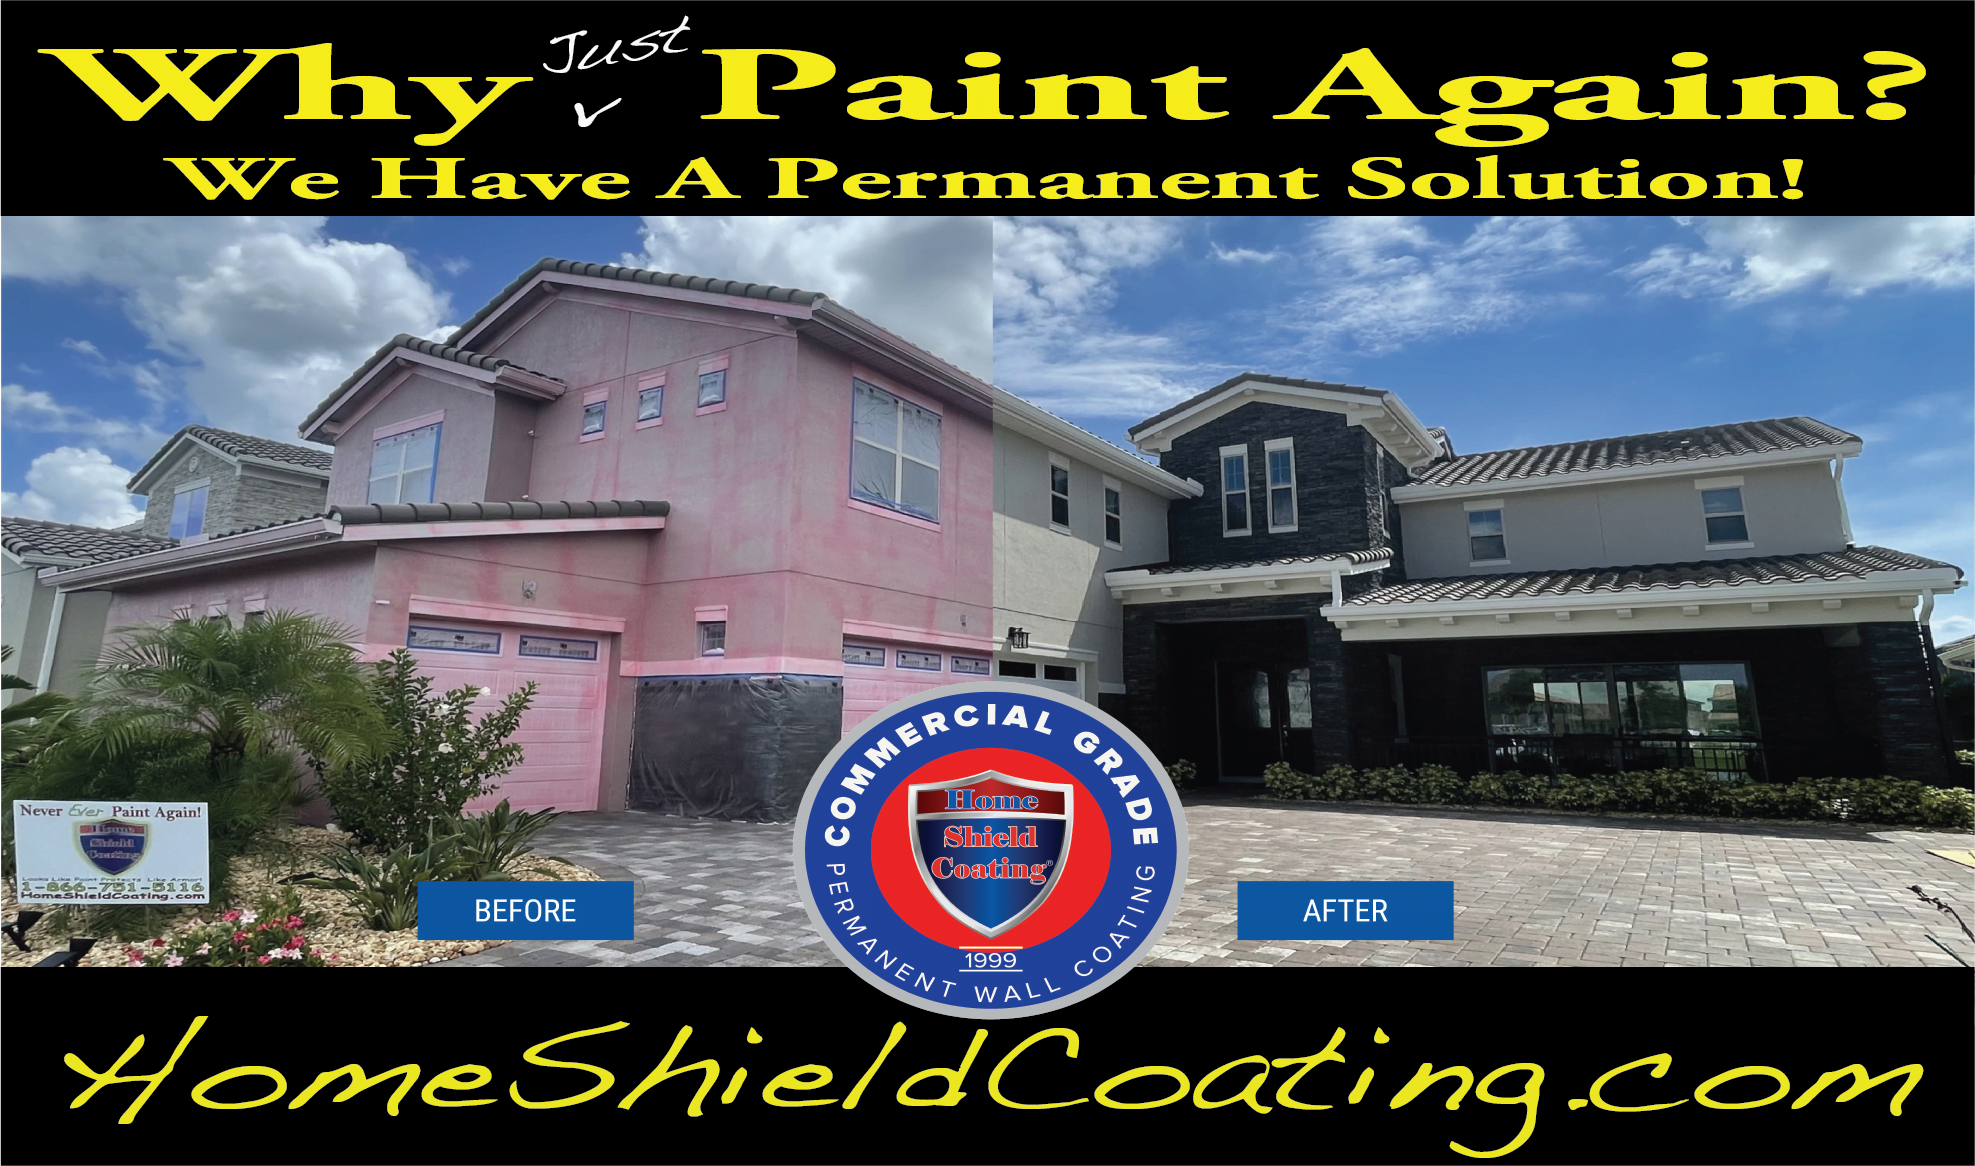 Before & After of Stucco House Coated with Home Shield Coating.